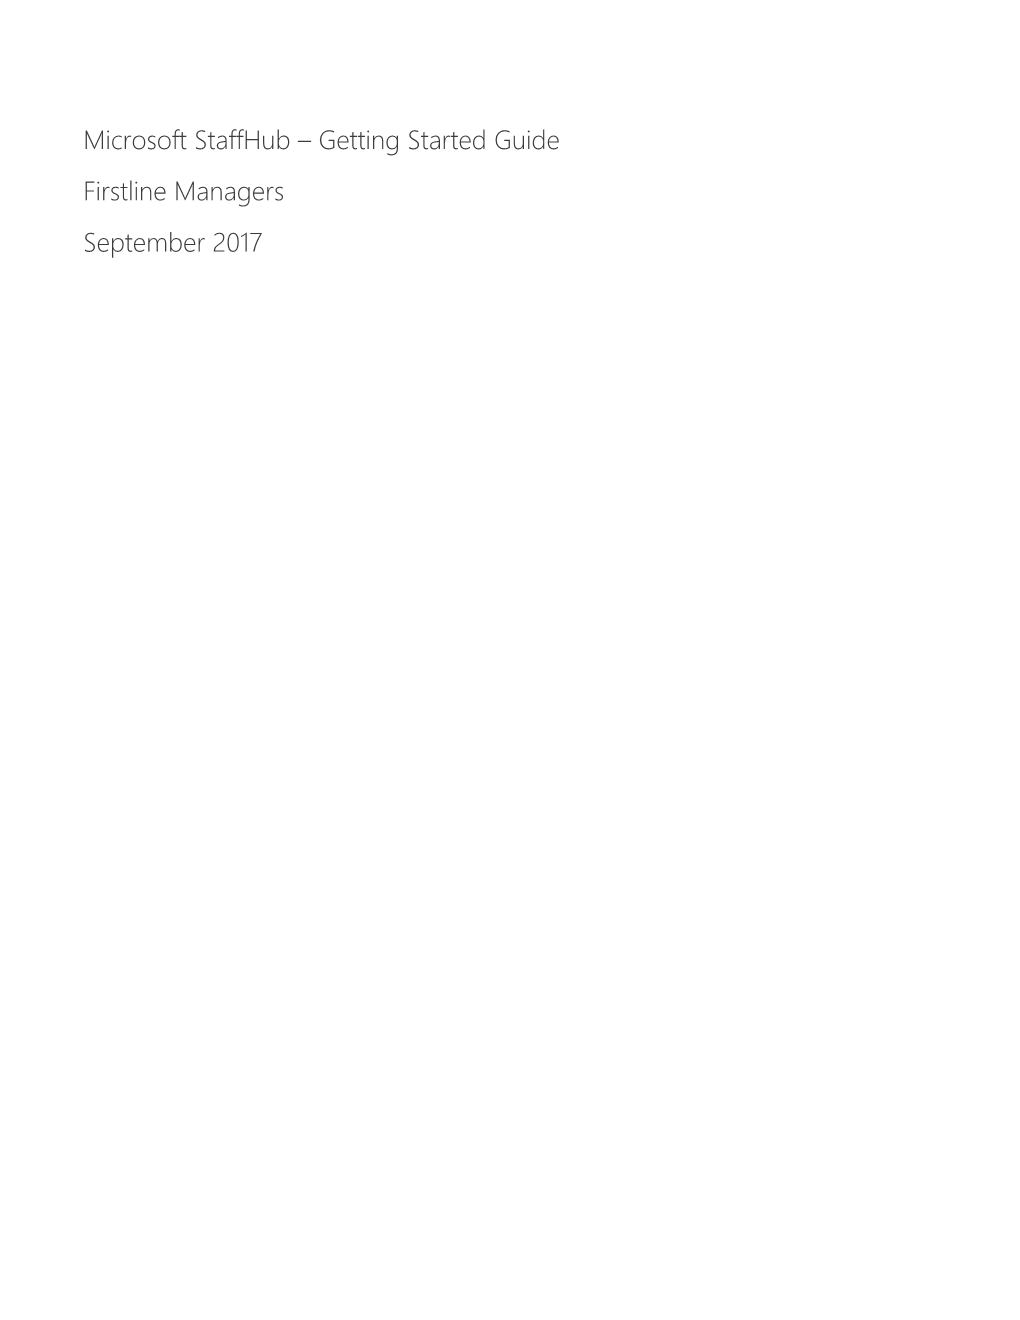 Microsoft Staffhub Firstline Manager Getting Started Guide